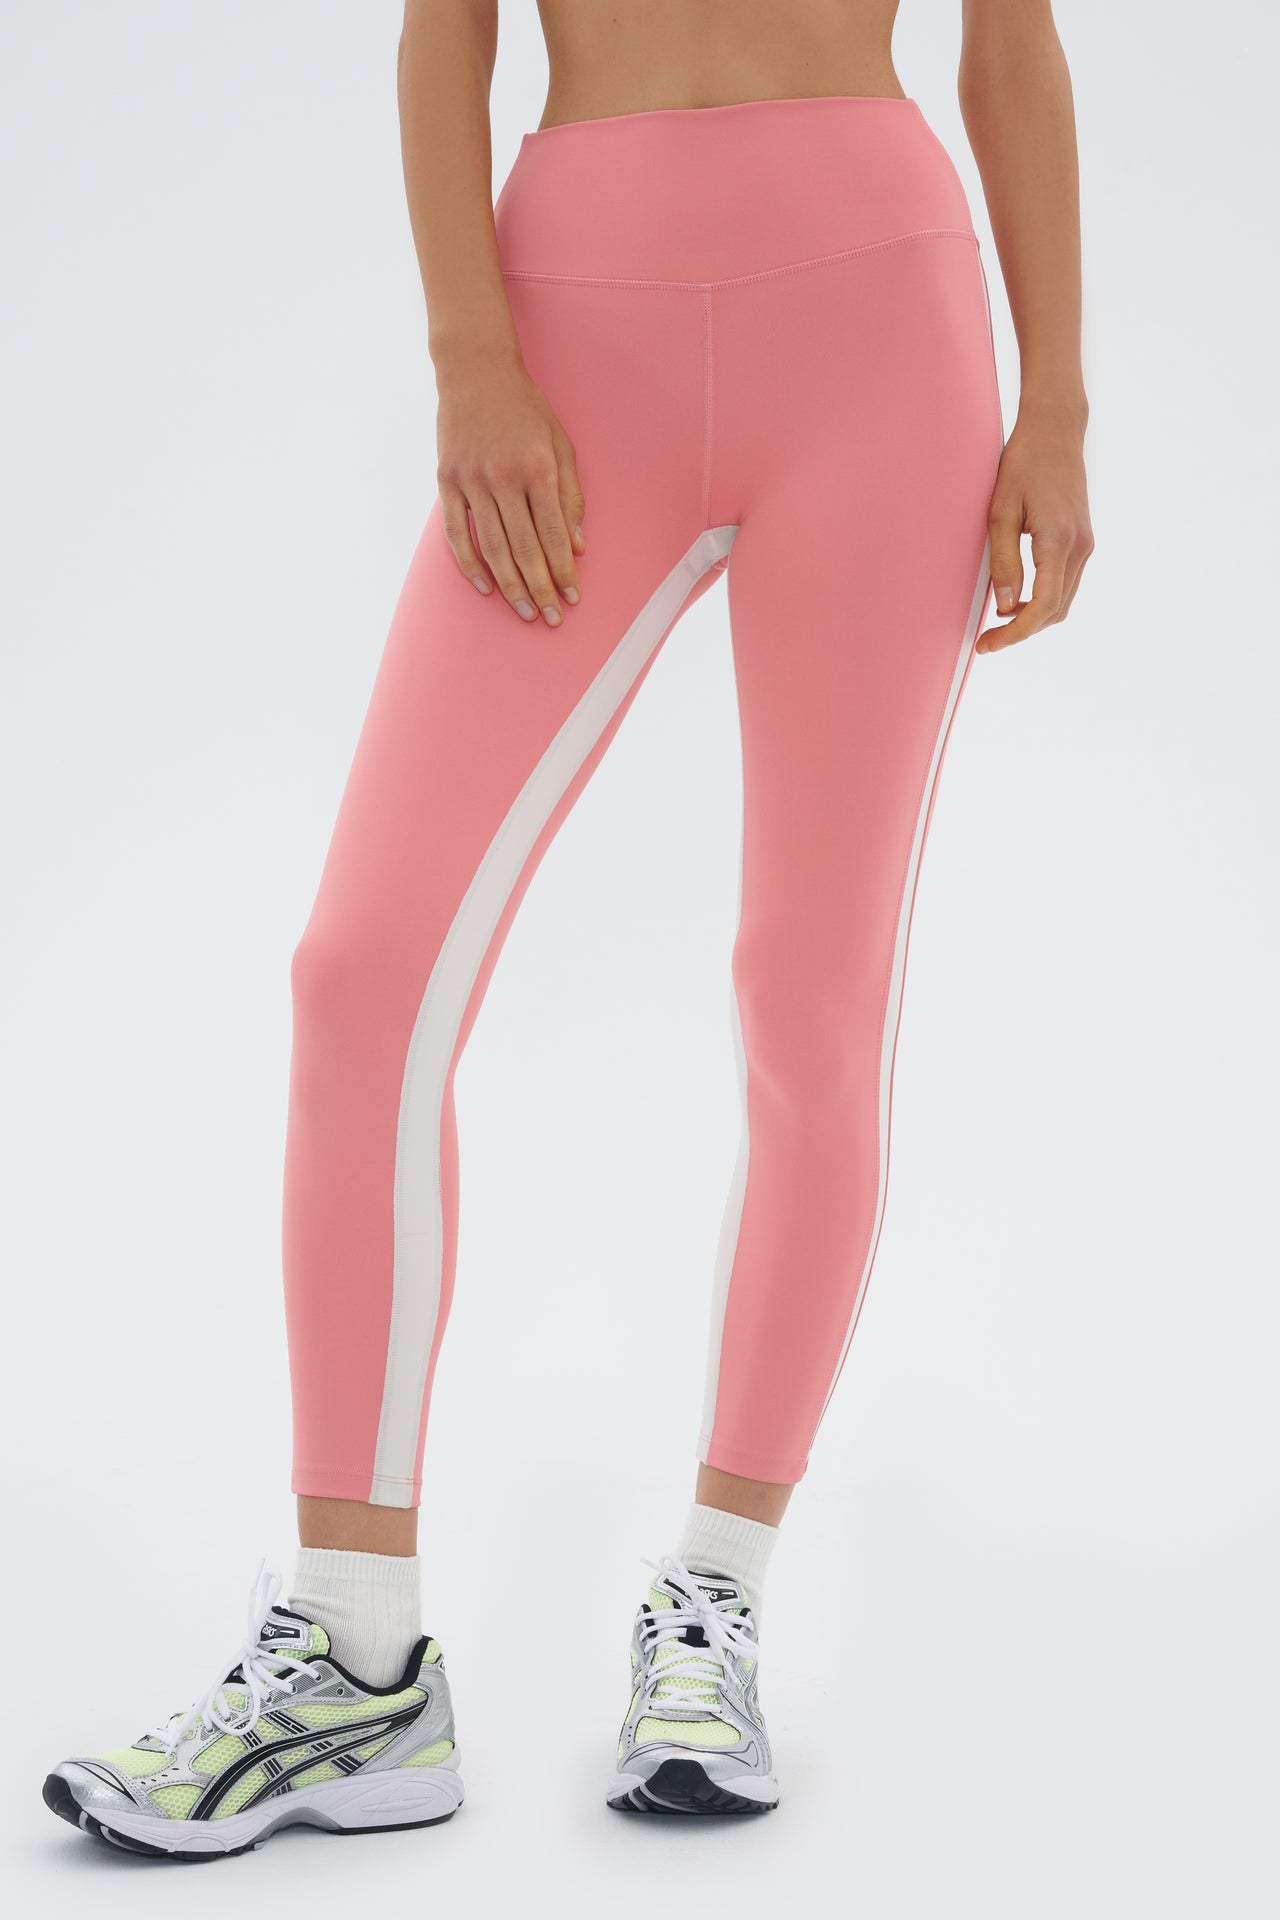 Front view of girl wearing light pink leggings with a white stripe down the side and inseam and multicolored shoes